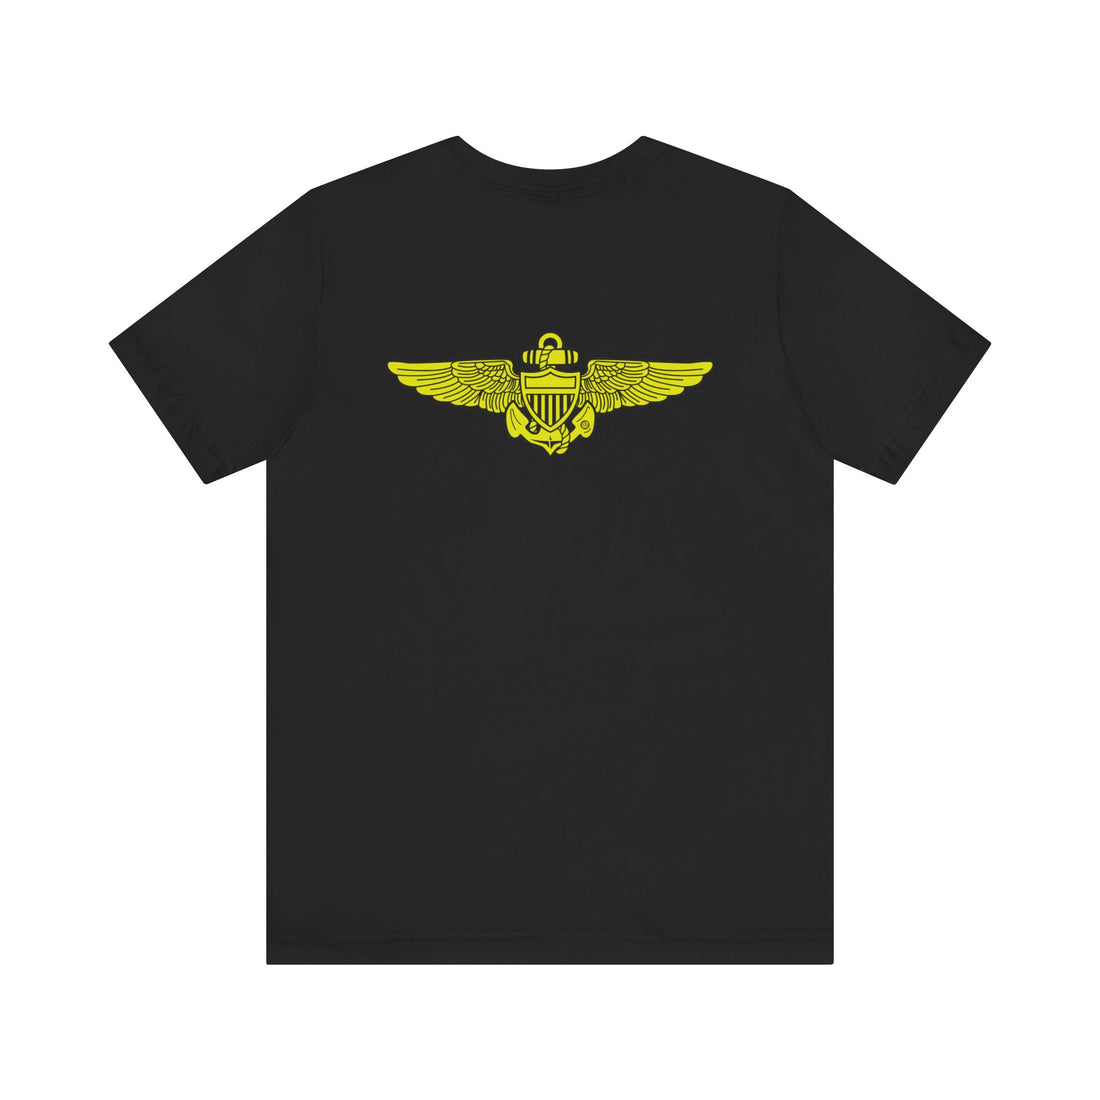 Naval Aviator Wings T-Shirt - Wings on front and Back Navy, Marines, Coast Guard, Aviation, Veteran